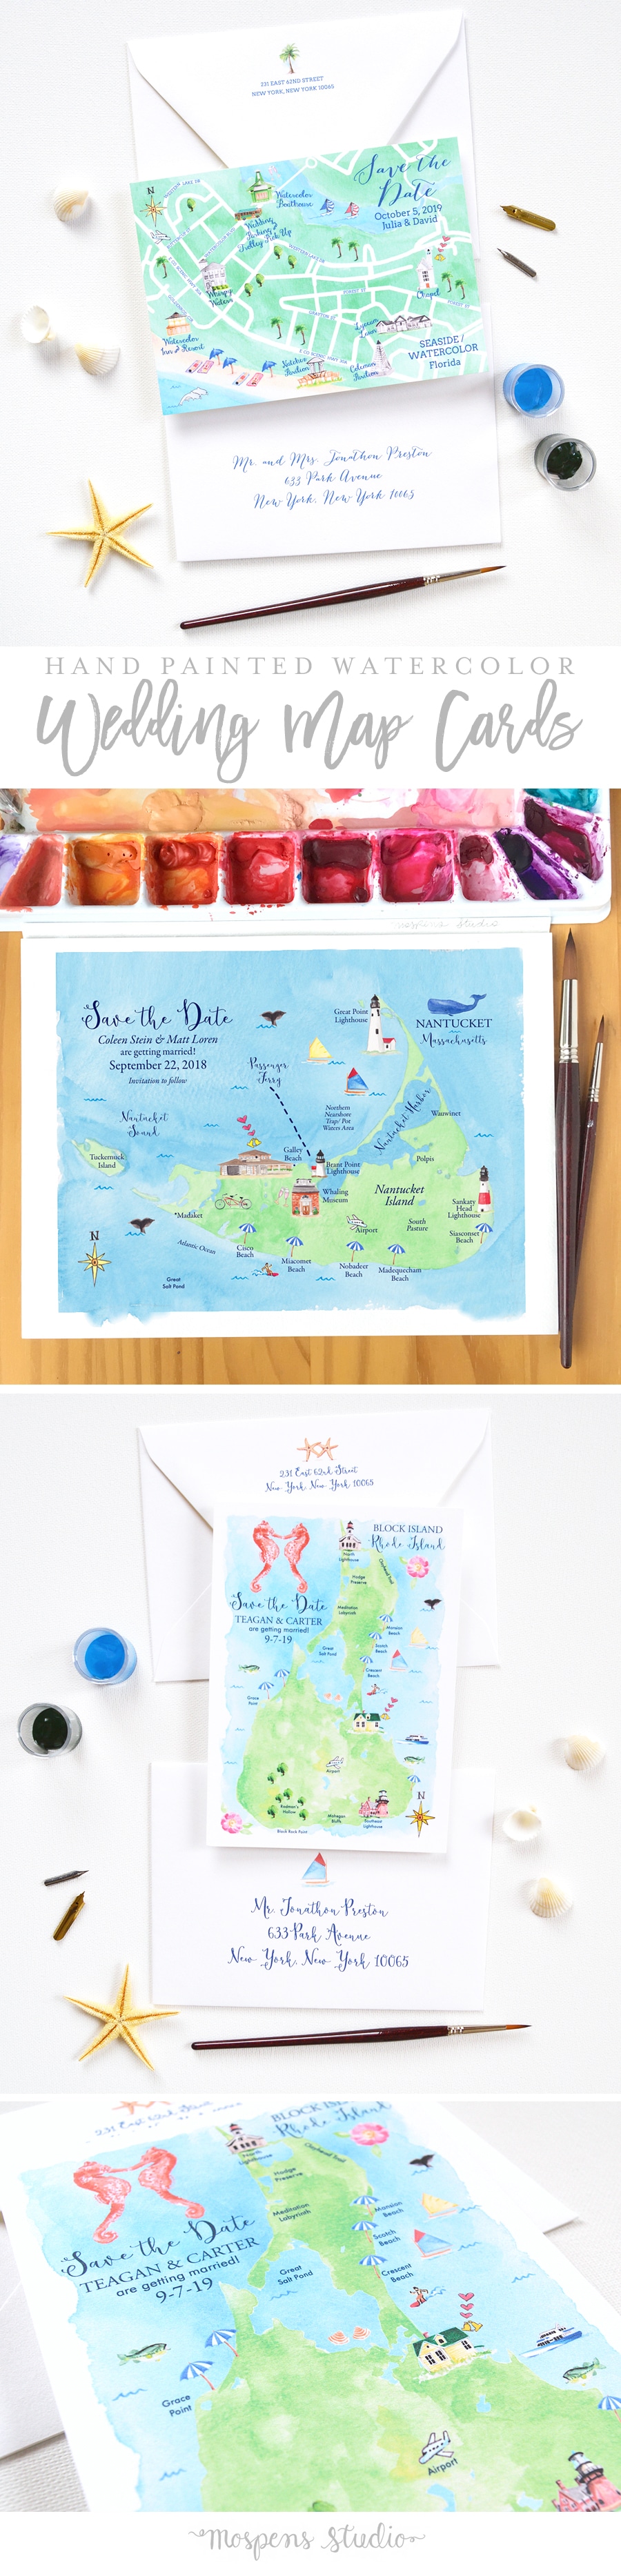 Hand painted watercolor wedding save the date maps by artist Michelle Mospens. | Mospens Studio